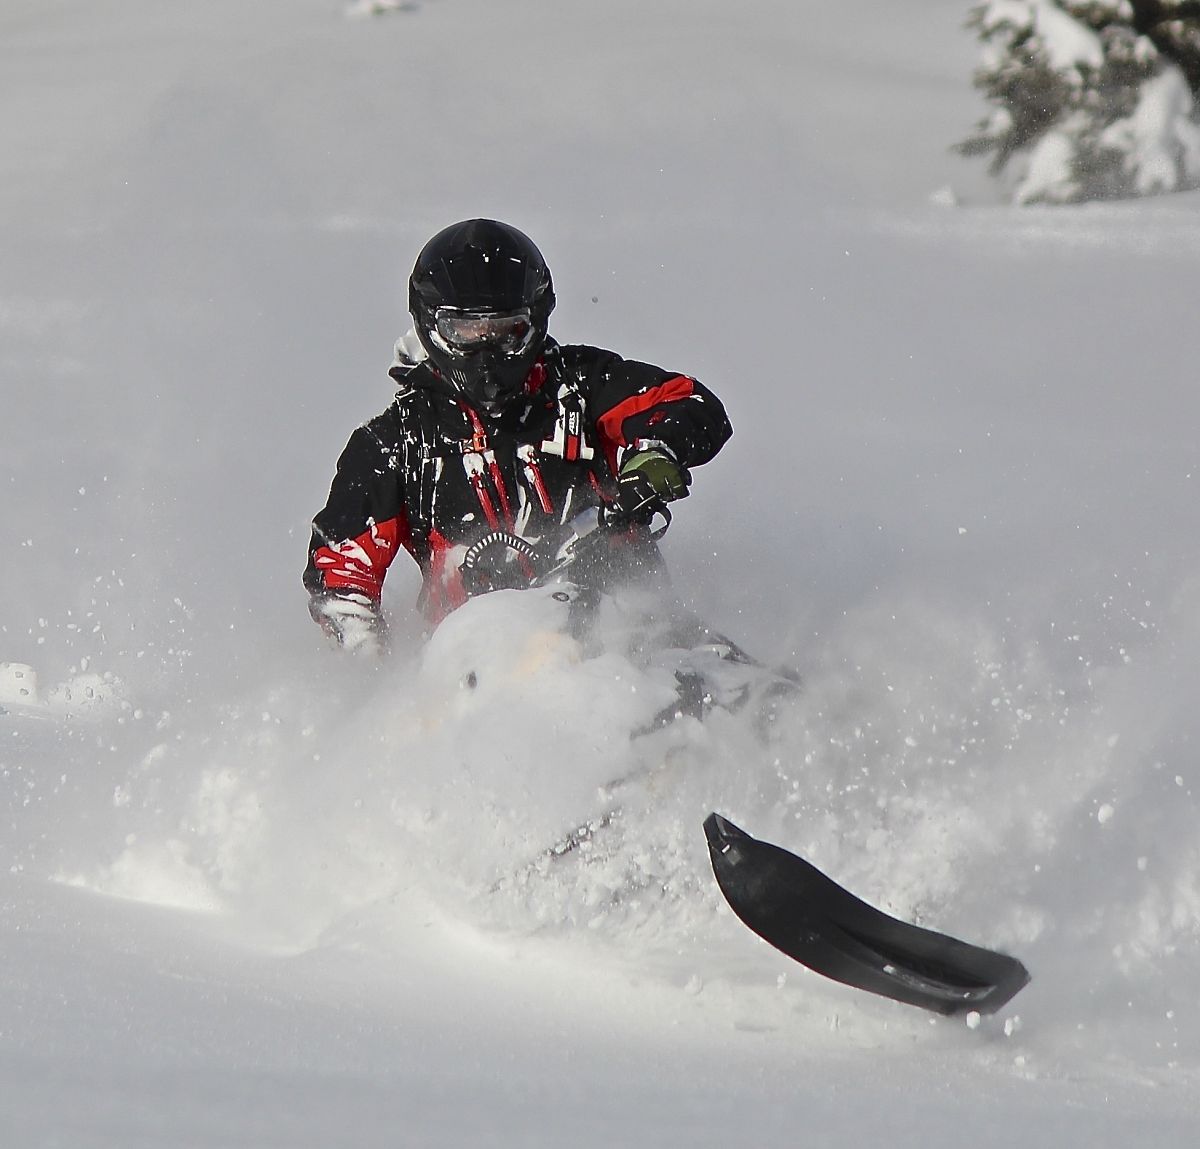 Jon Boyle enjoying the pow…it doesn't get much better than this!